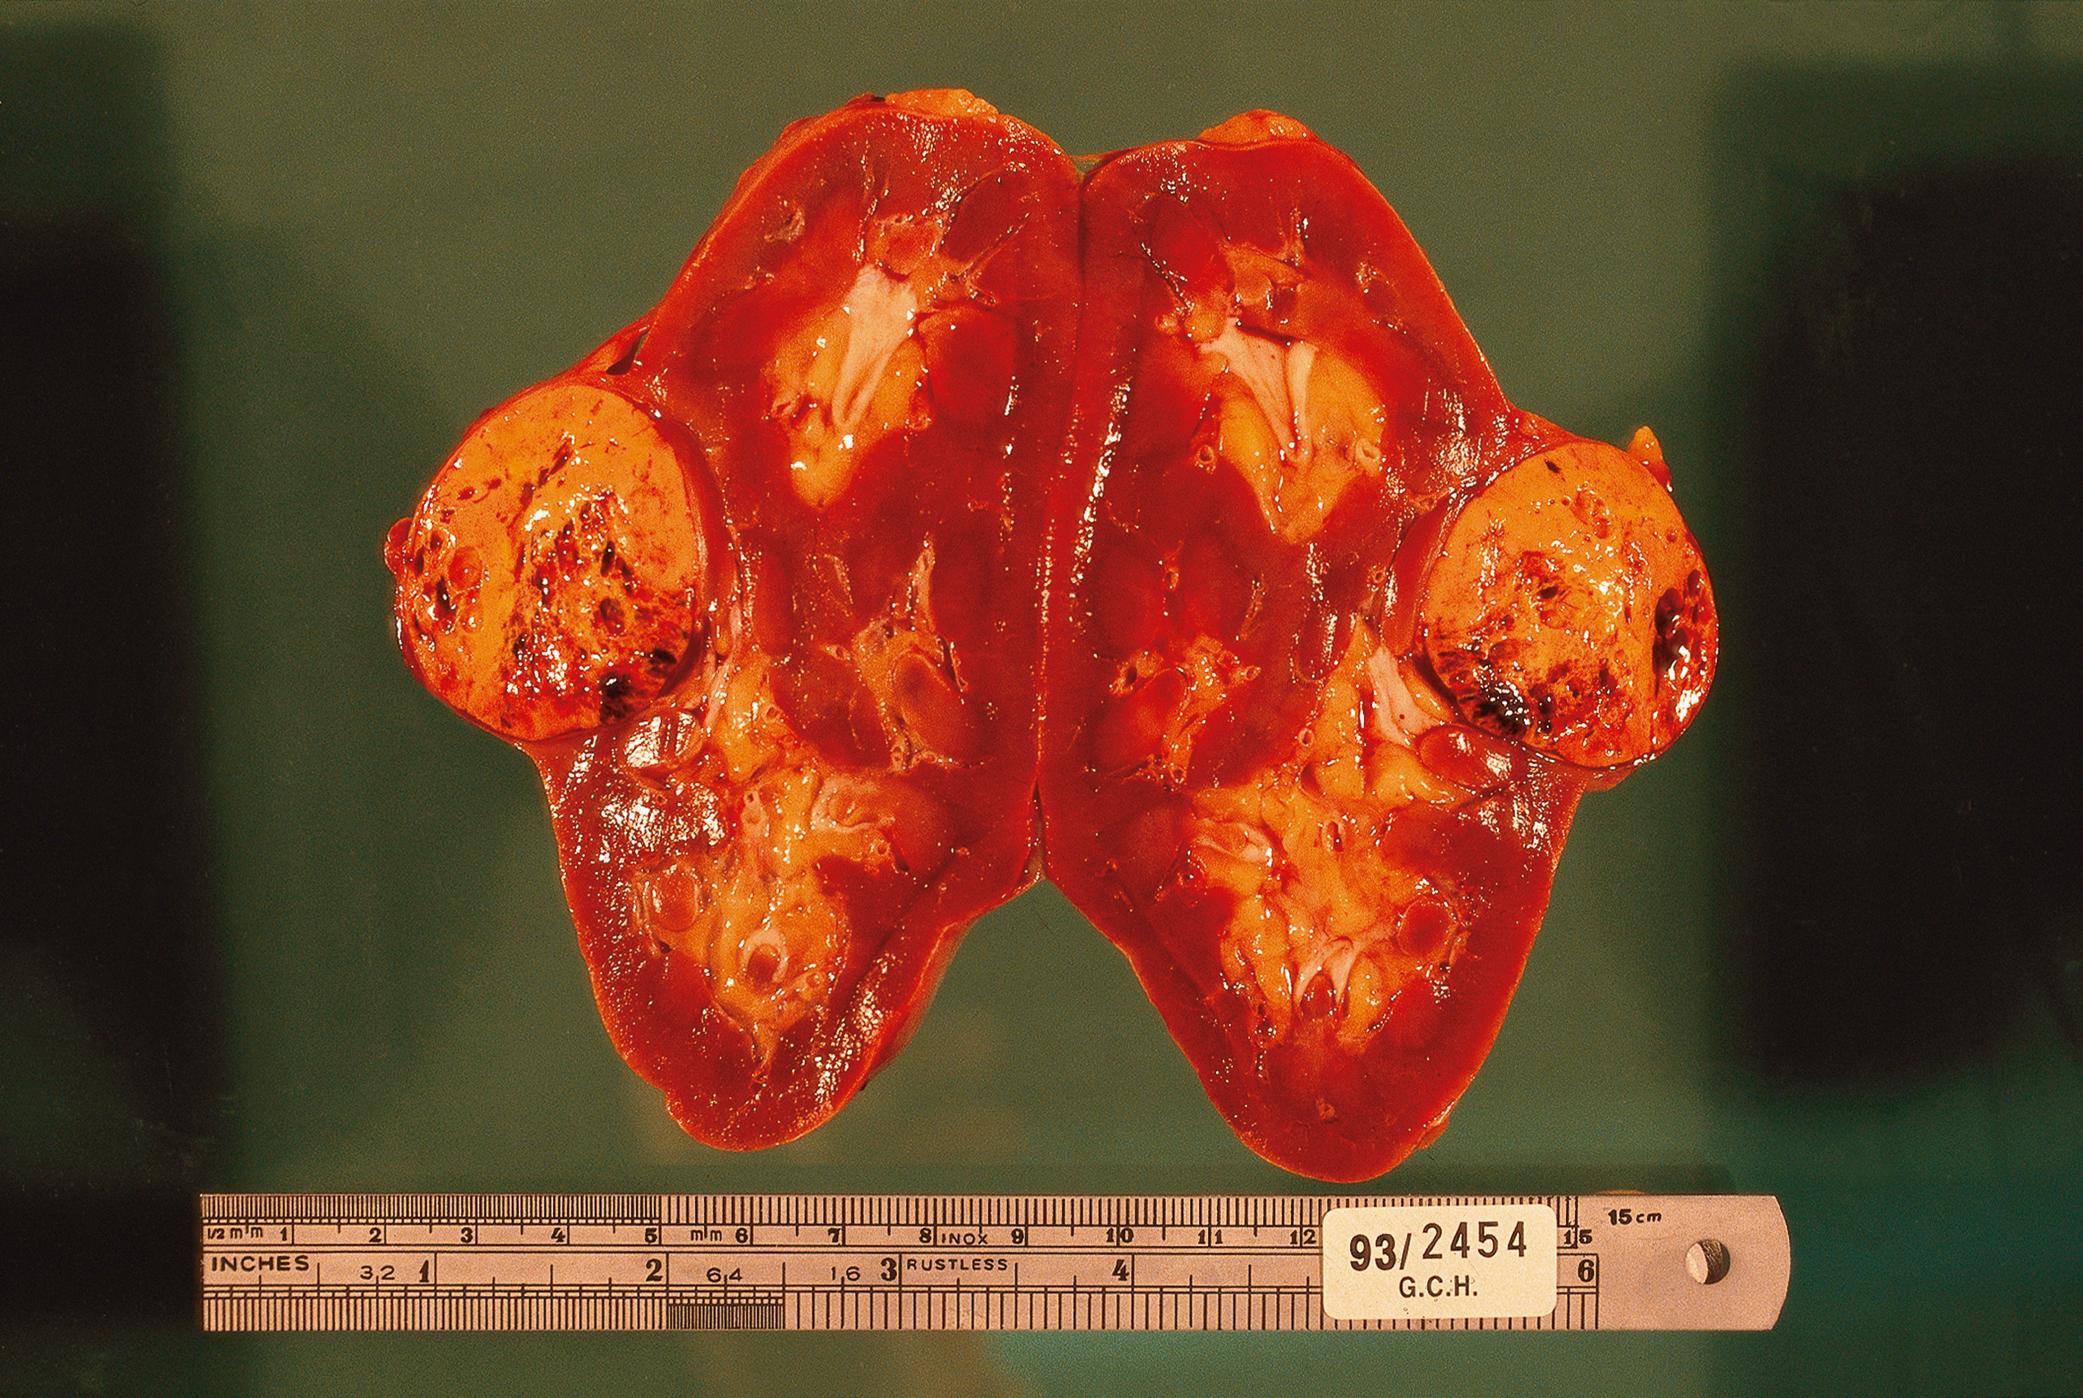 E-Fig. 15.9 G, Renal cell carcinoma. There is a well circumscribed, spherical tumour 30 mm in diameter bulging through the cortical surface of the kidney. Its cut surface is bright yellow. It shows solid areas, cystic areas and areas of haemorrhage.